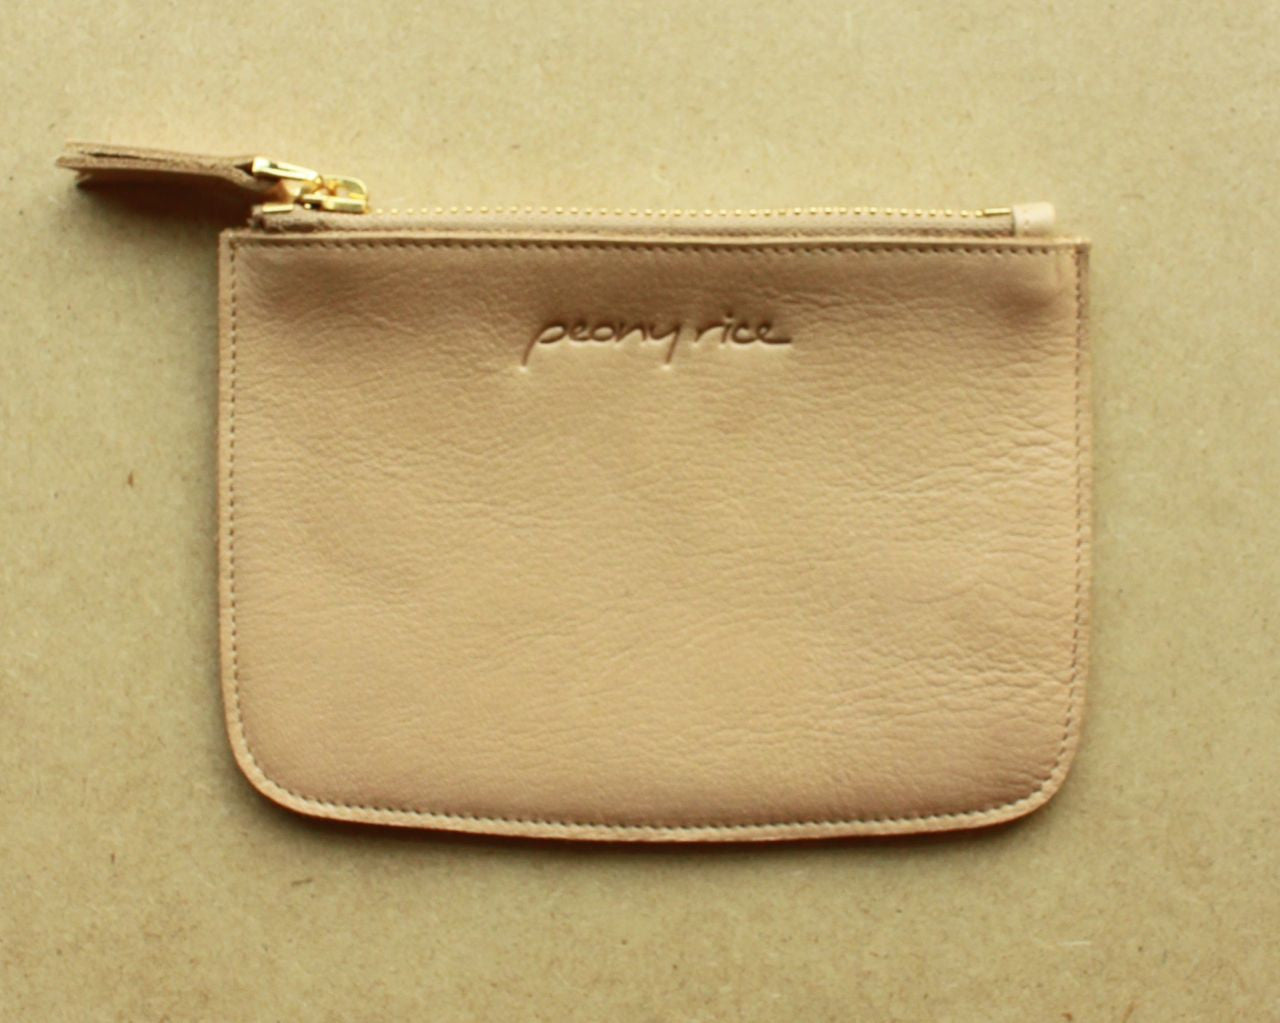 Style: HOLLY Leather Zip Coin Purse - Peony Rice